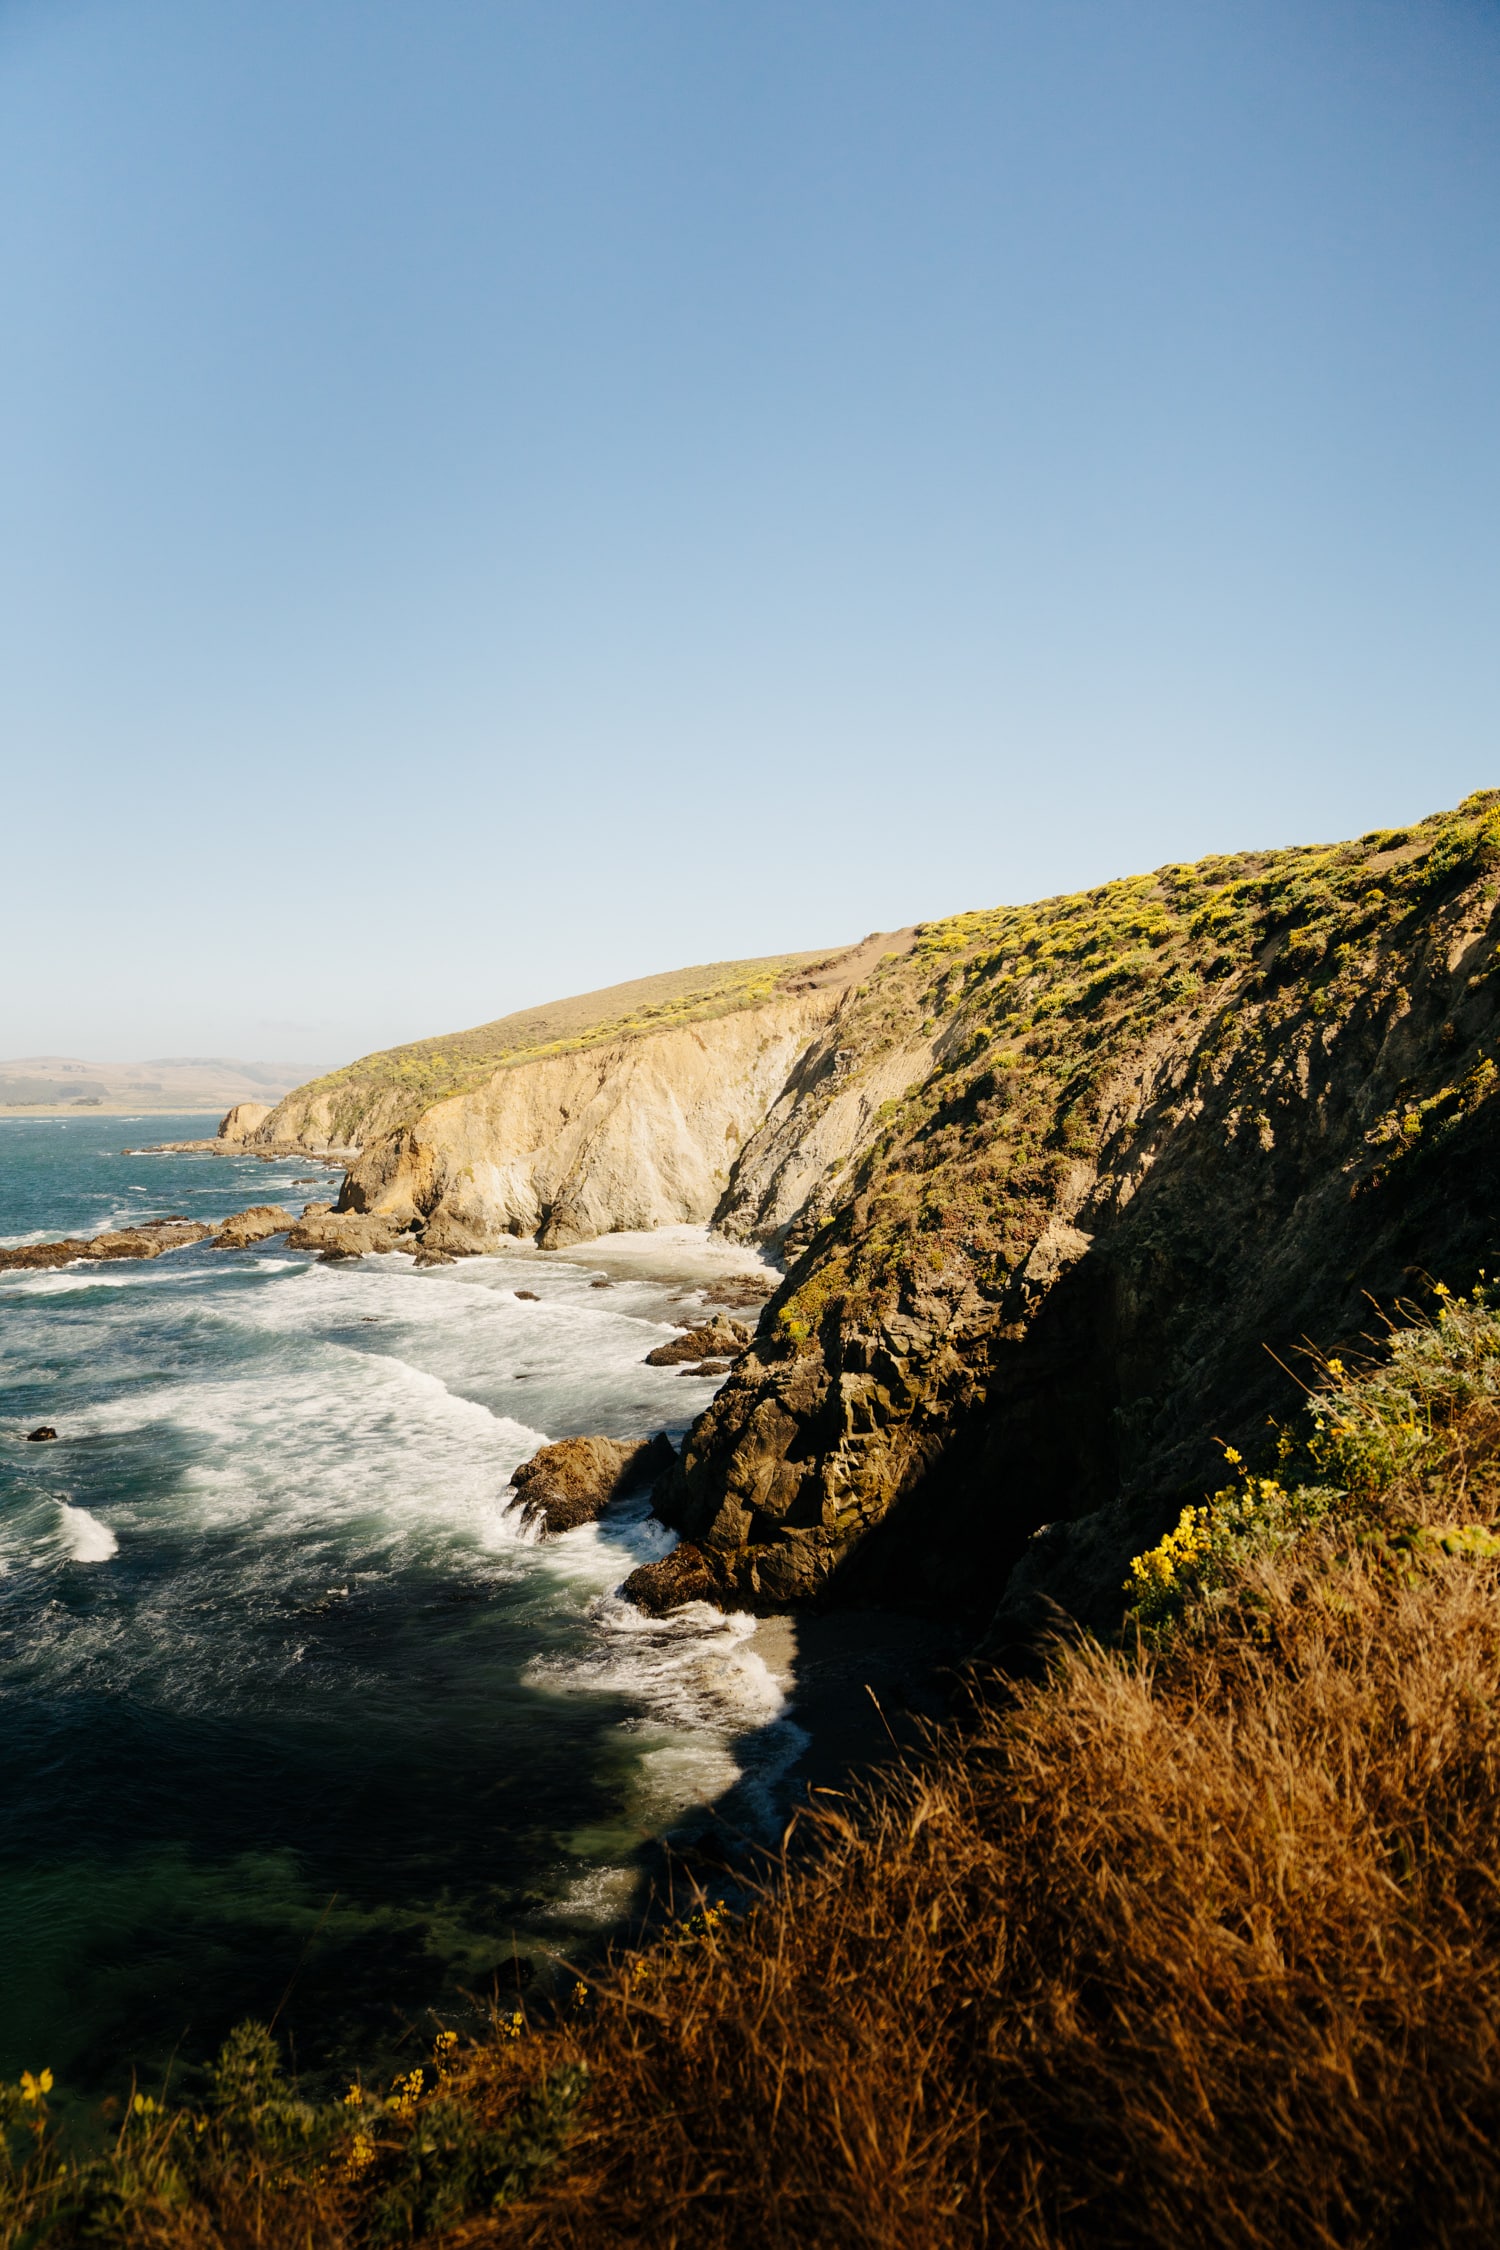 Hike the Tomales Point Trail at Point Reyes National Seashore